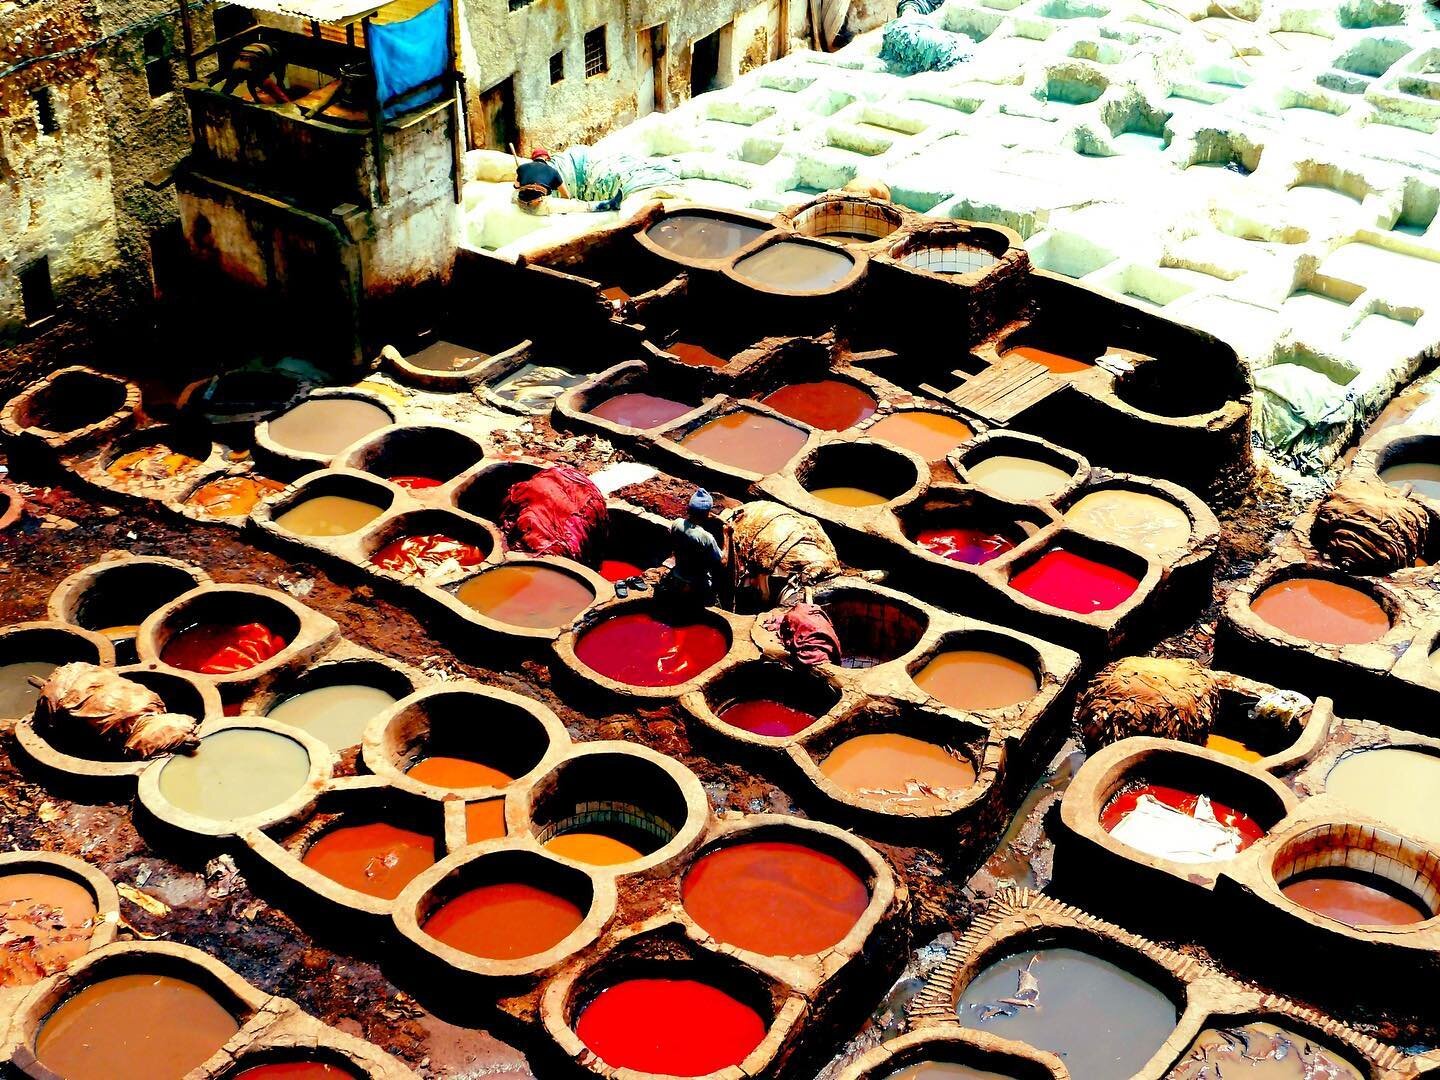 &ldquo;All colors are the friends of their neighbors and the lovers of their opposites.&rdquo;- Marc Chagall.

Throwback Thursday: the tanning pits of Fes, Morocco. From a distance, it looks like a paint set of earthy pigments. #throwbackthursday #fe